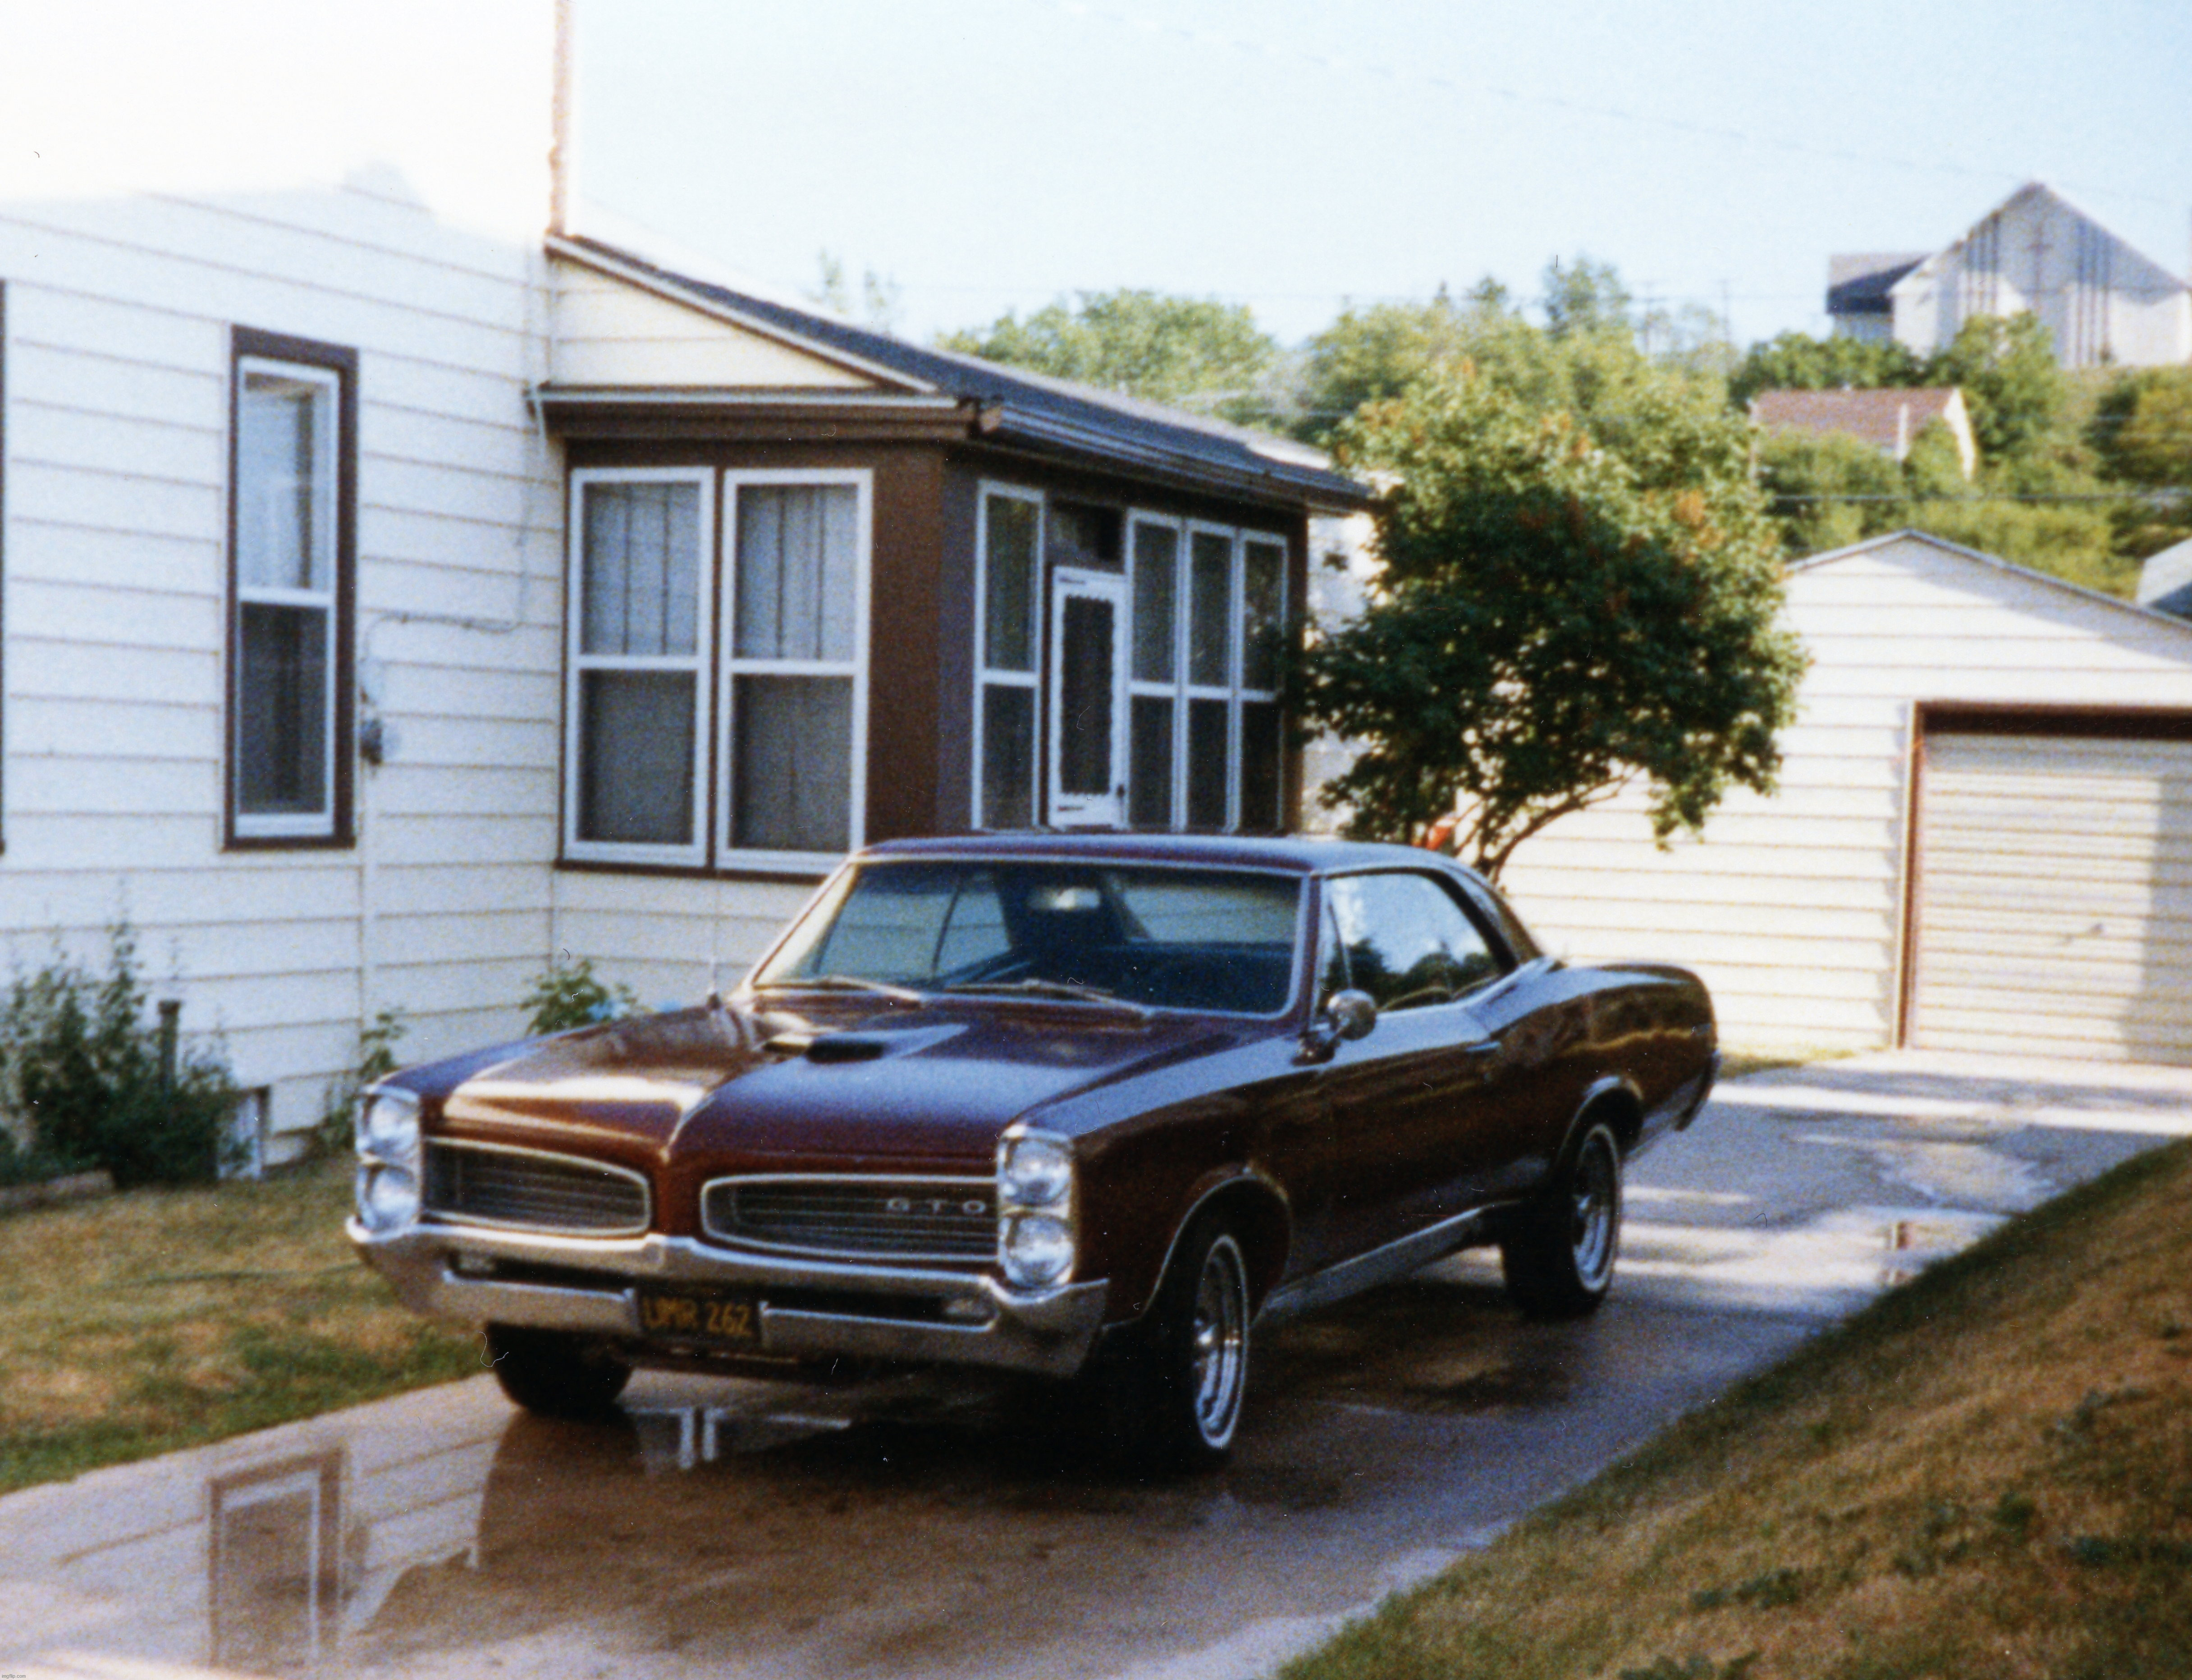 My 1967 Pontiac GTO | image tagged in photography,car | made w/ Imgflip meme maker